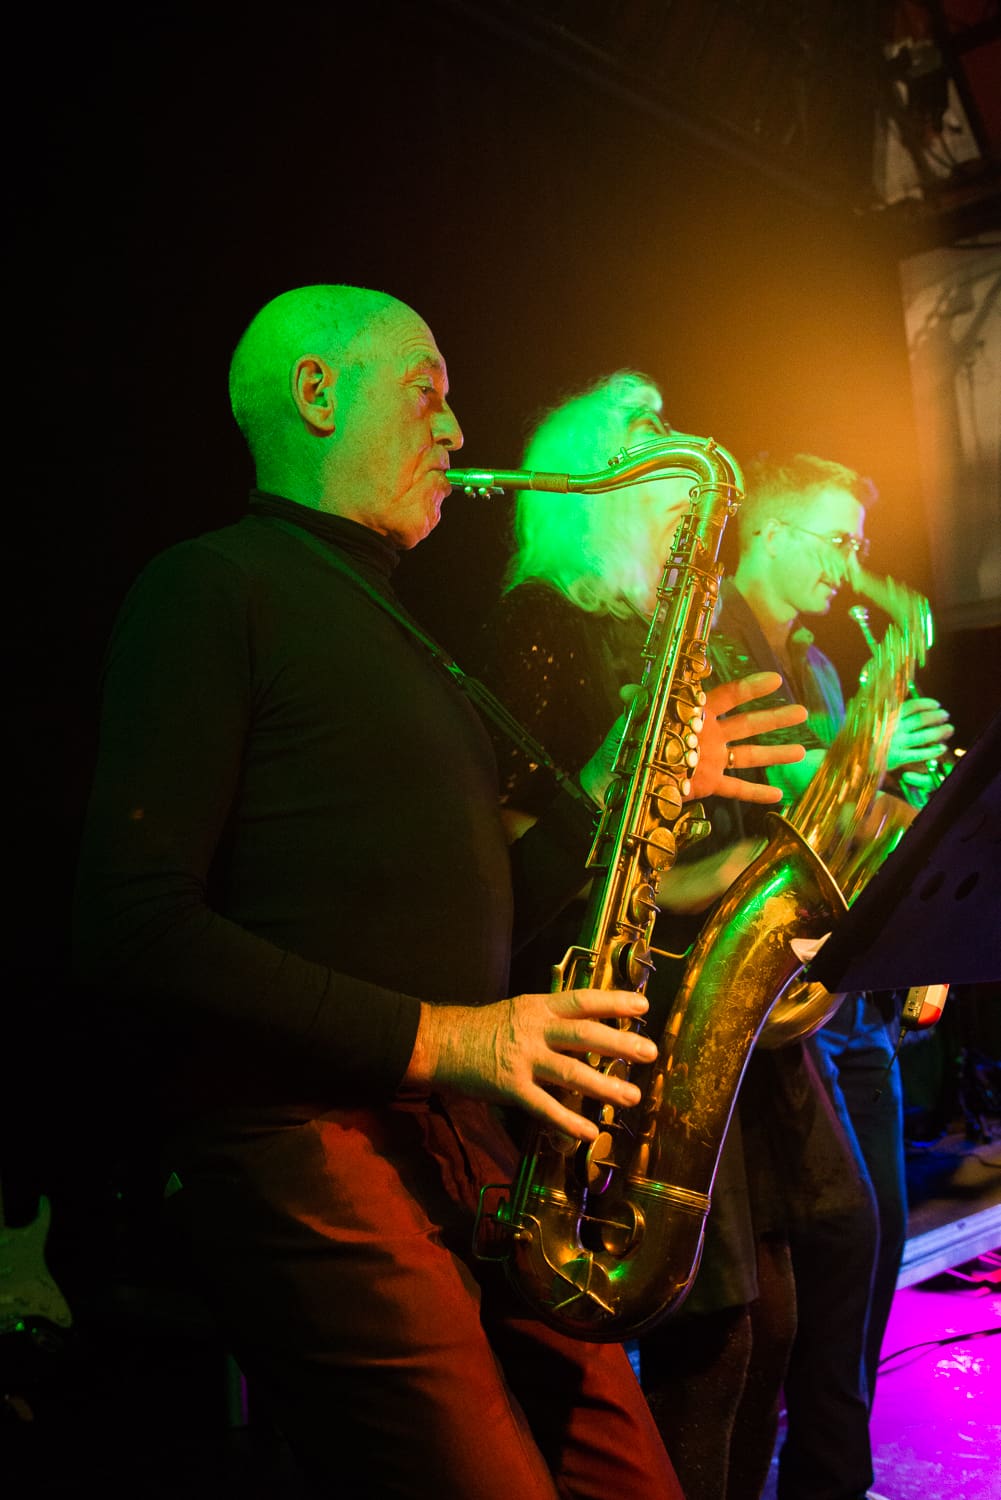 A groups of musicians with saxophones perform on stage